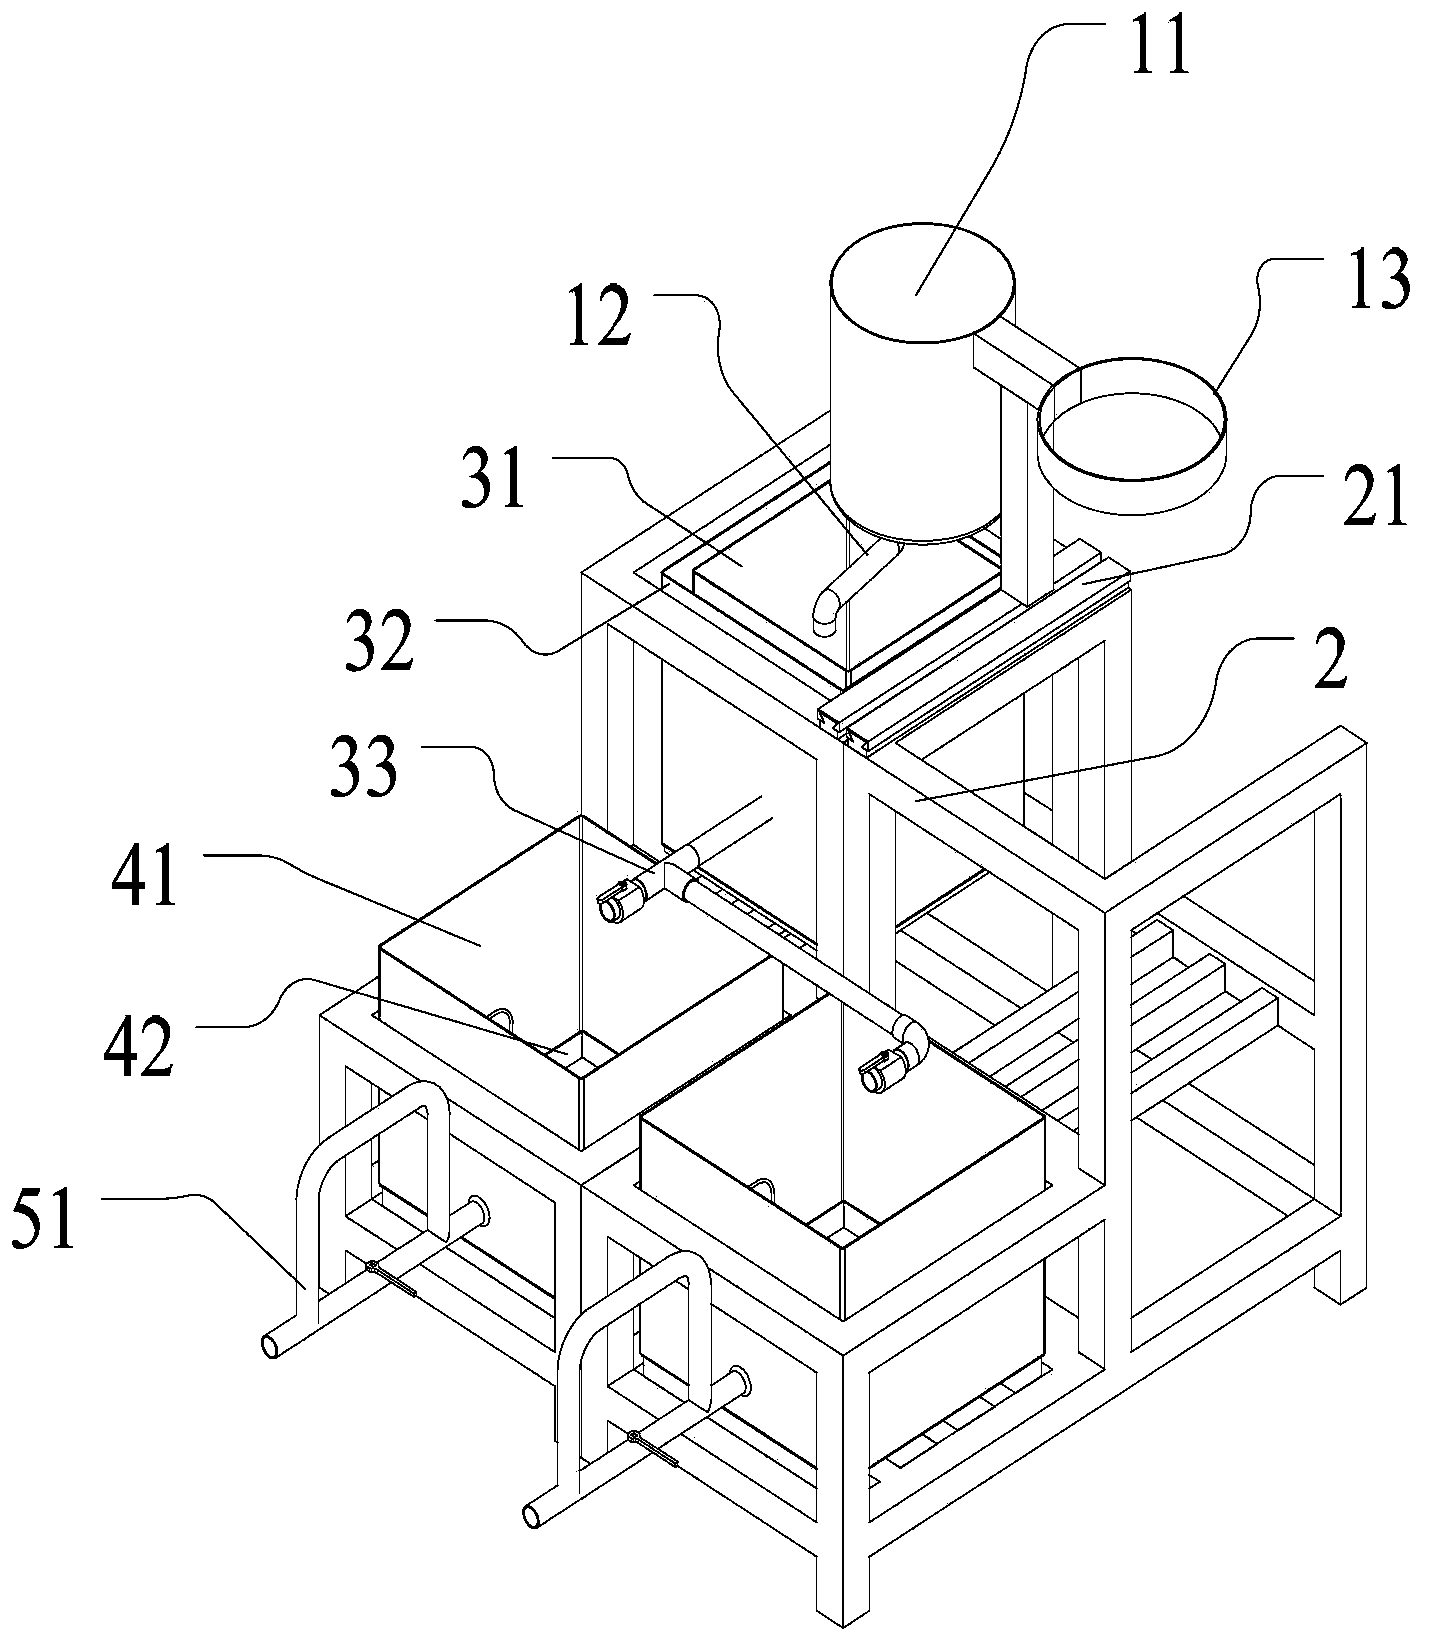 Treatment device for separating polyurethane waste material